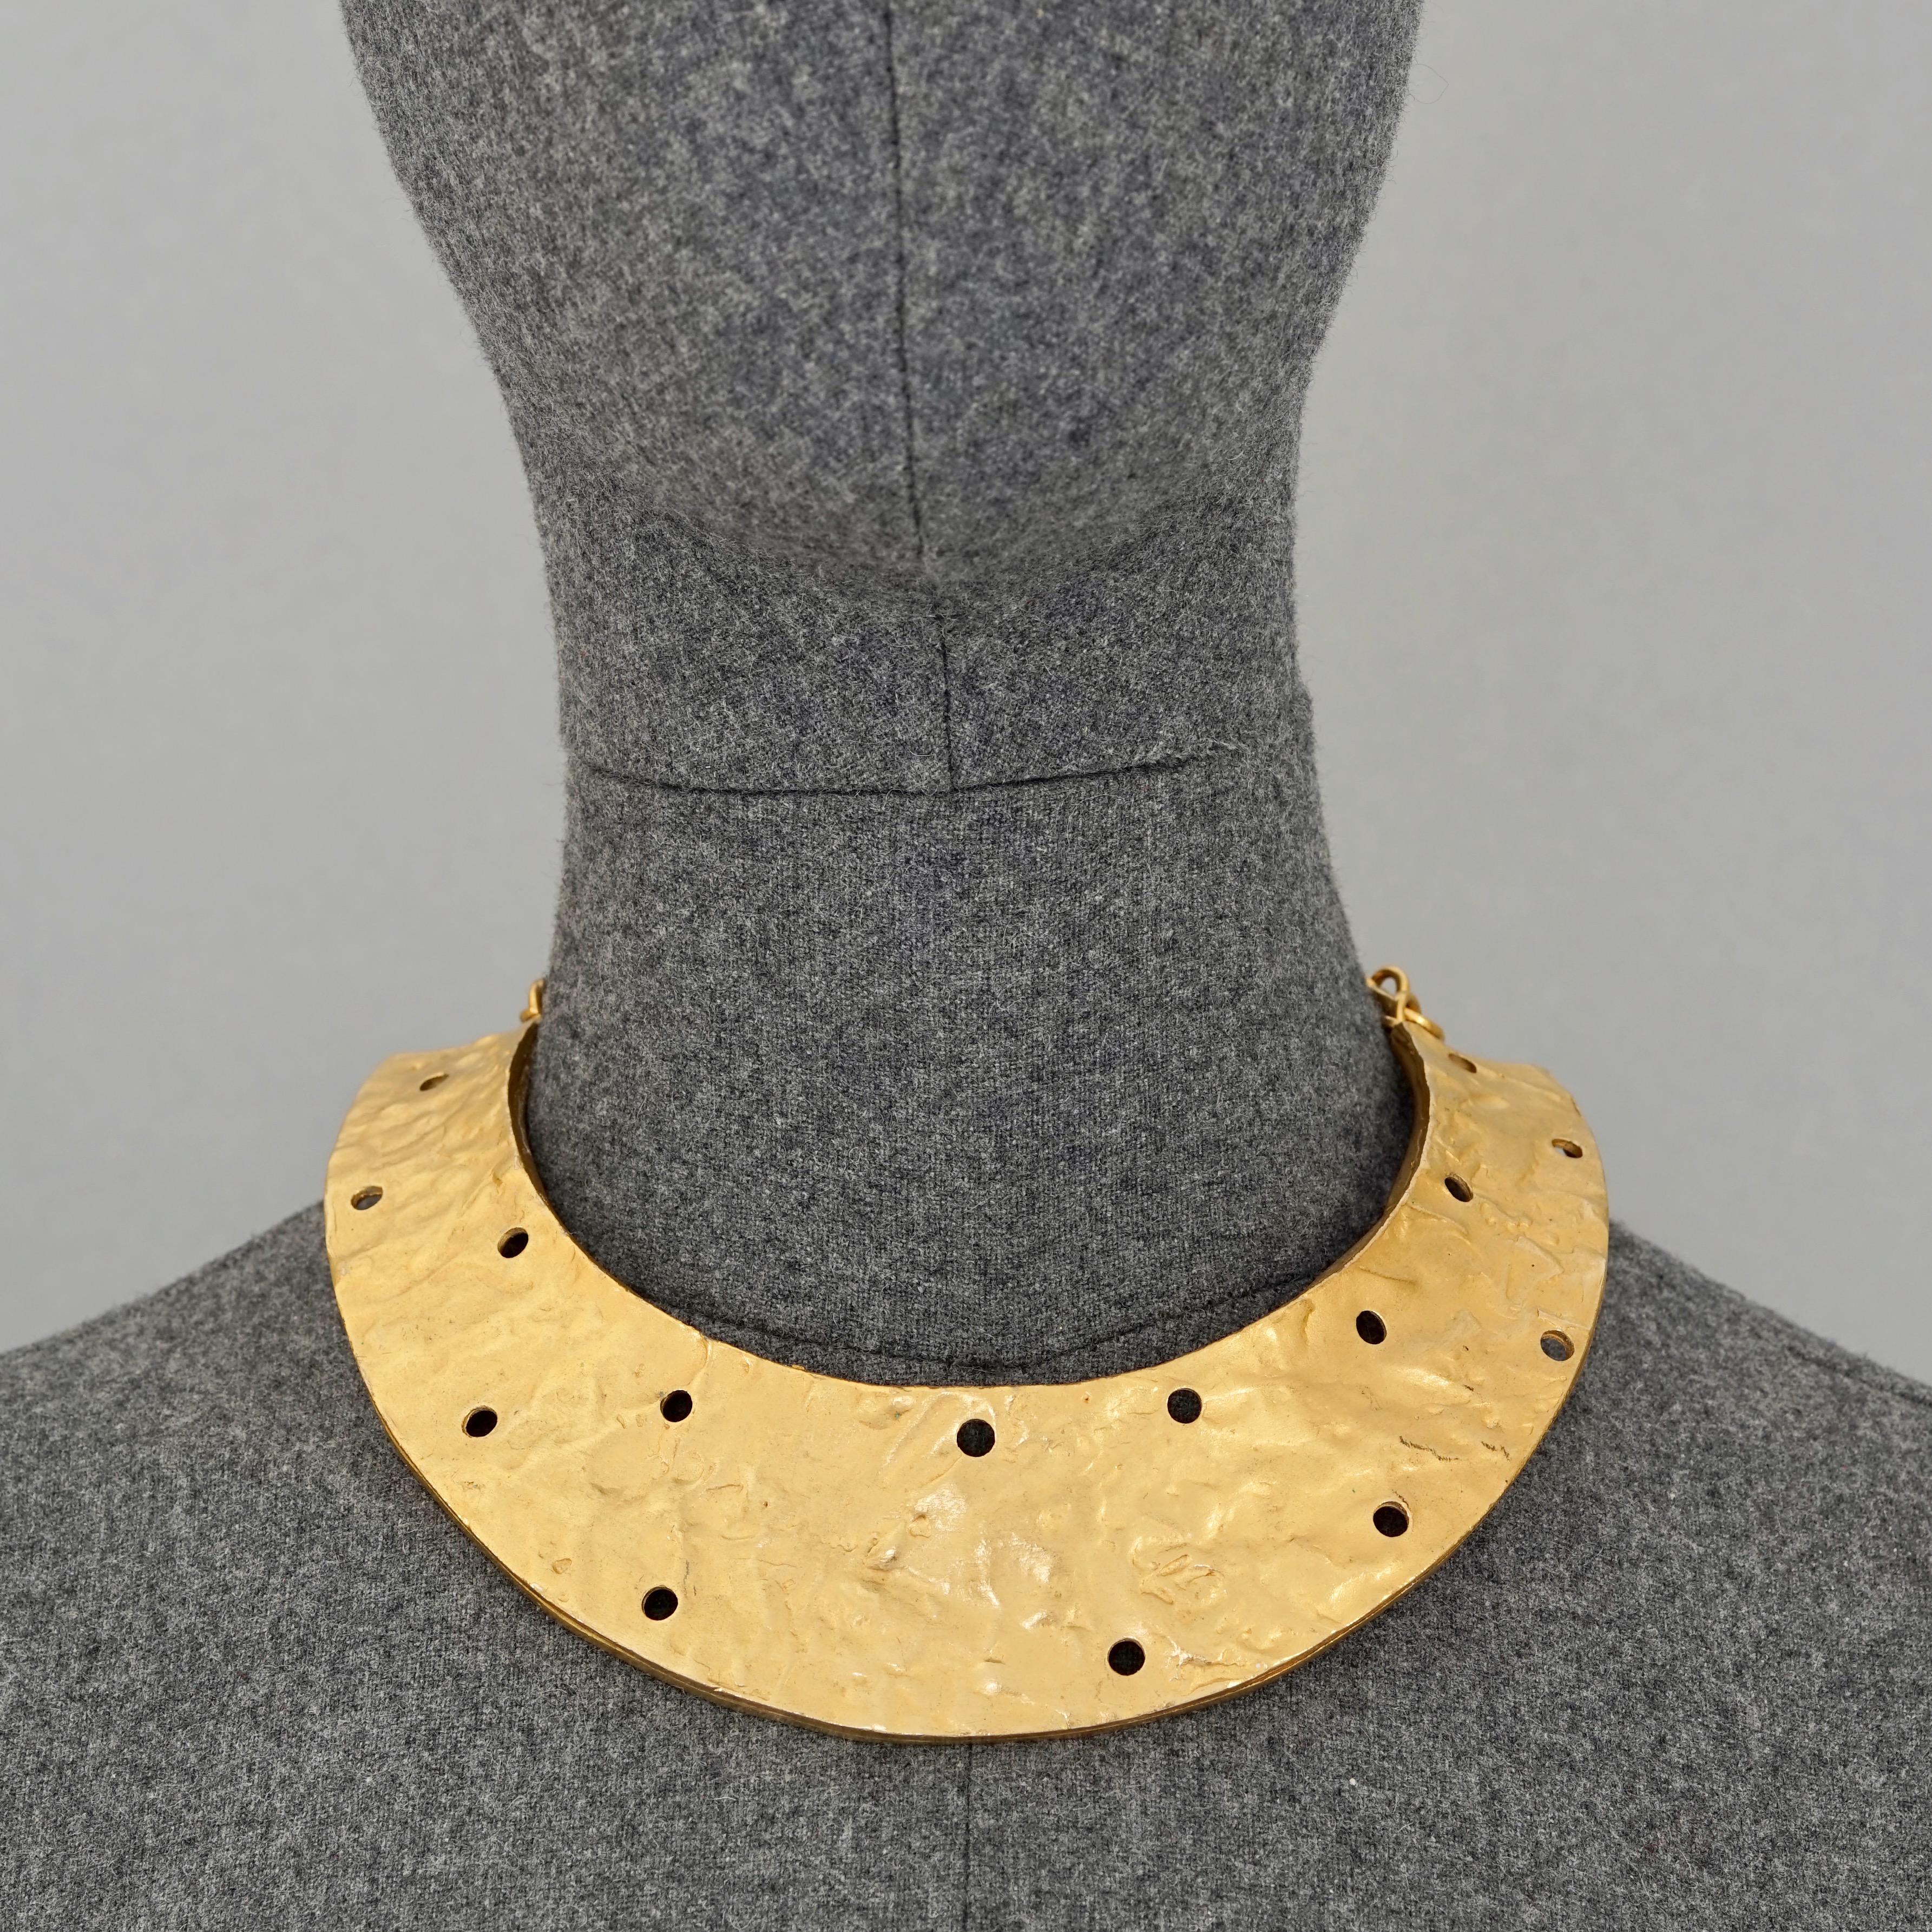 Vintage BICHE DE BERE Punched Hole Limited Edition Wide Collar Choker

Measurements:
Height: 1.77 inches (4.5 cm)
Wearable Length: 13.26 inches (33.7 cm) maximum

Features:
- 100% authentic BICHE DE BERE.
- Limited edition 20/63.
- Wide, textured,